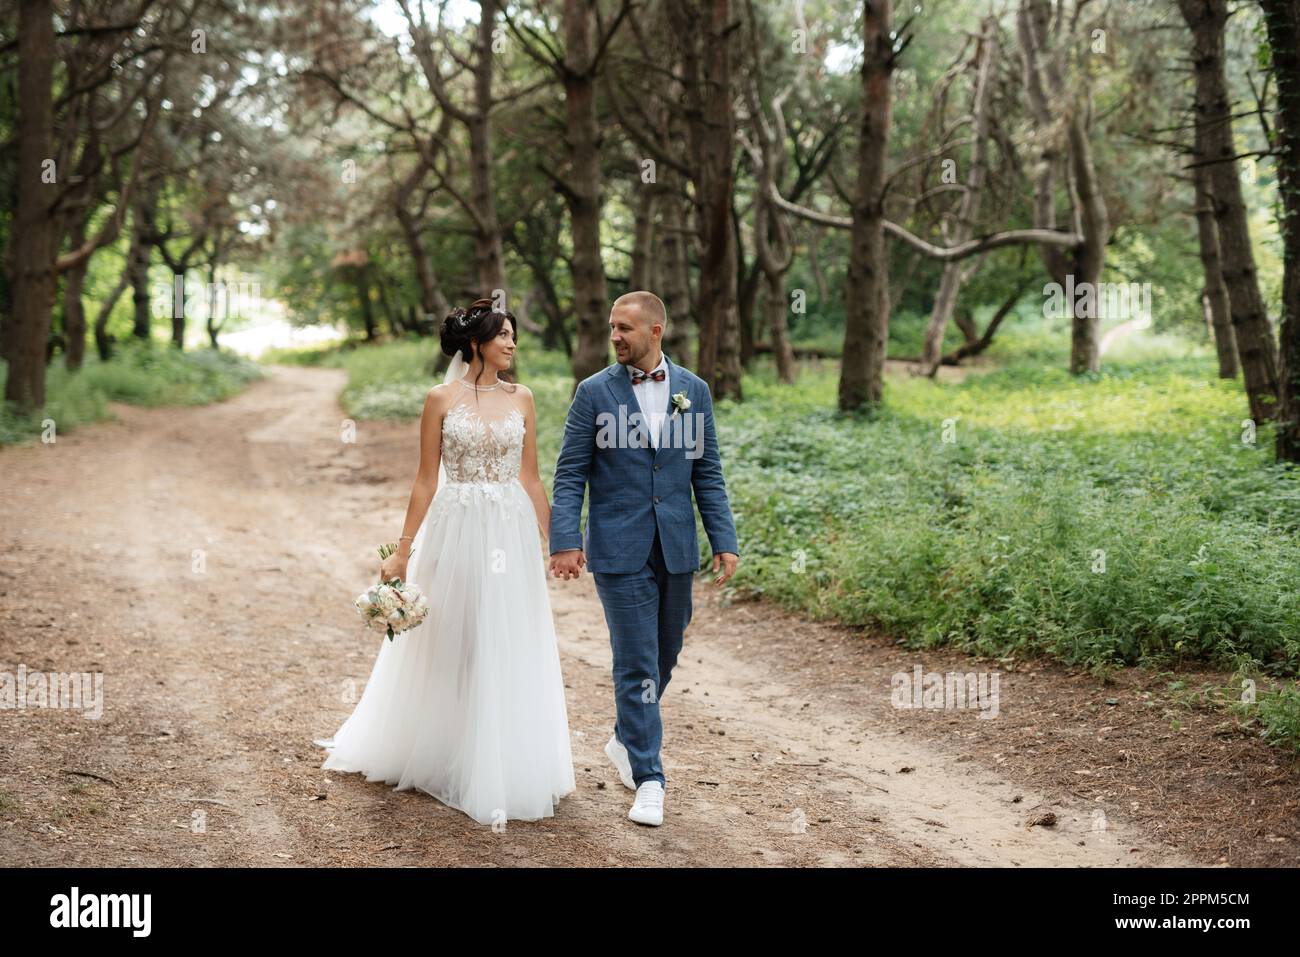 wedding walk of the bride and groom in the deciduous forest in summer Stock Photo